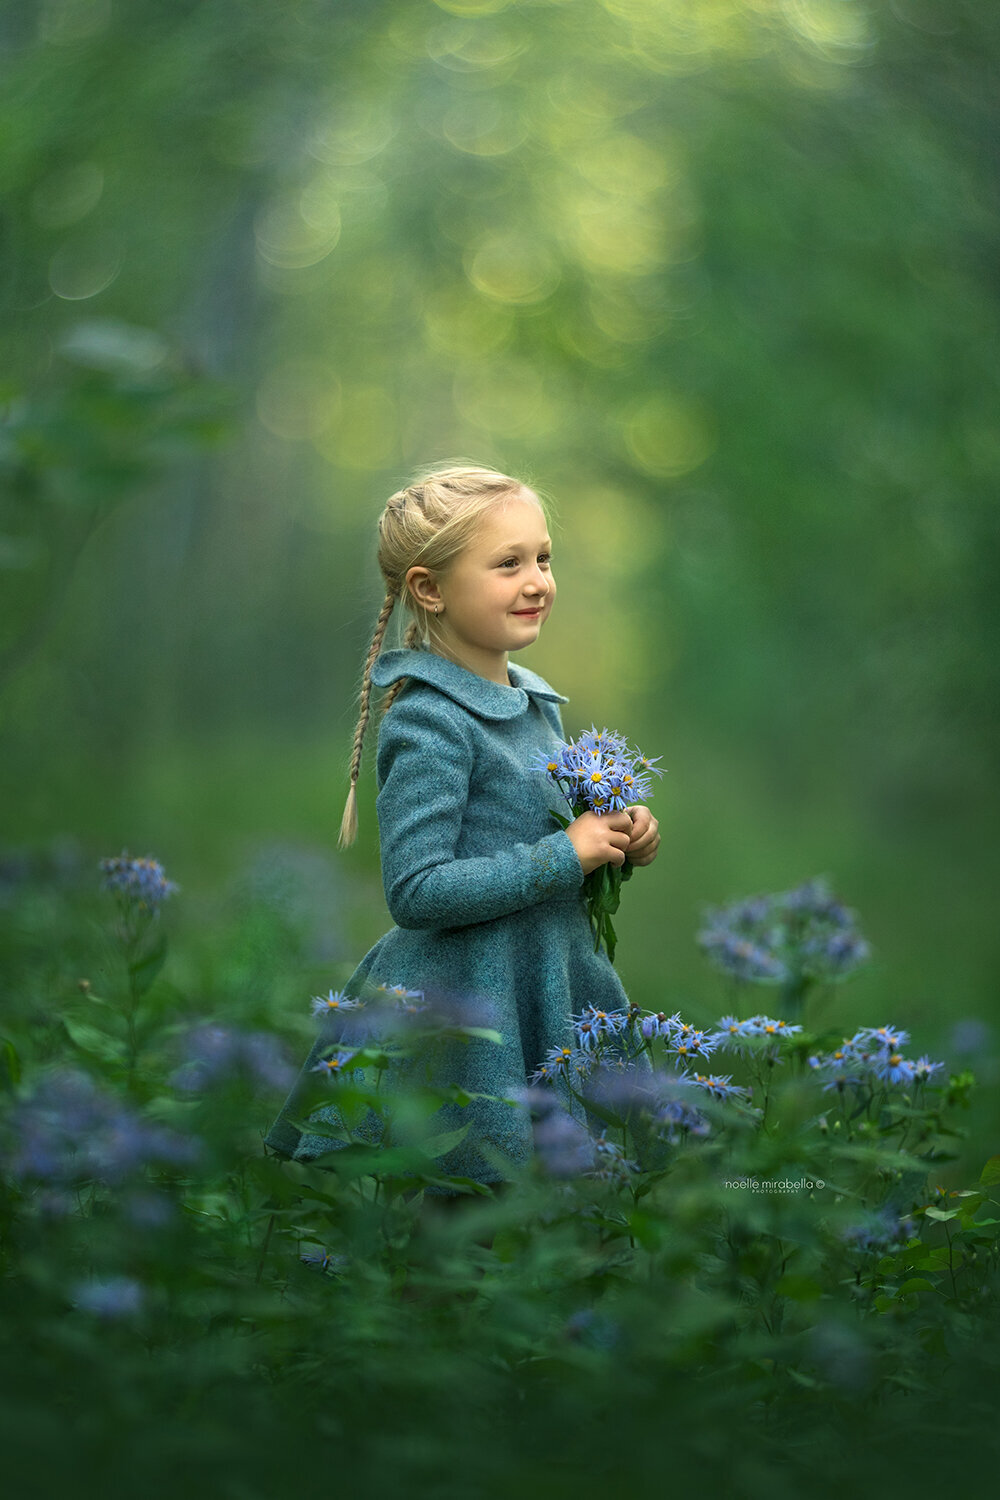 Girl in blue wool dress holding blue flowers, standing in a flower patch.